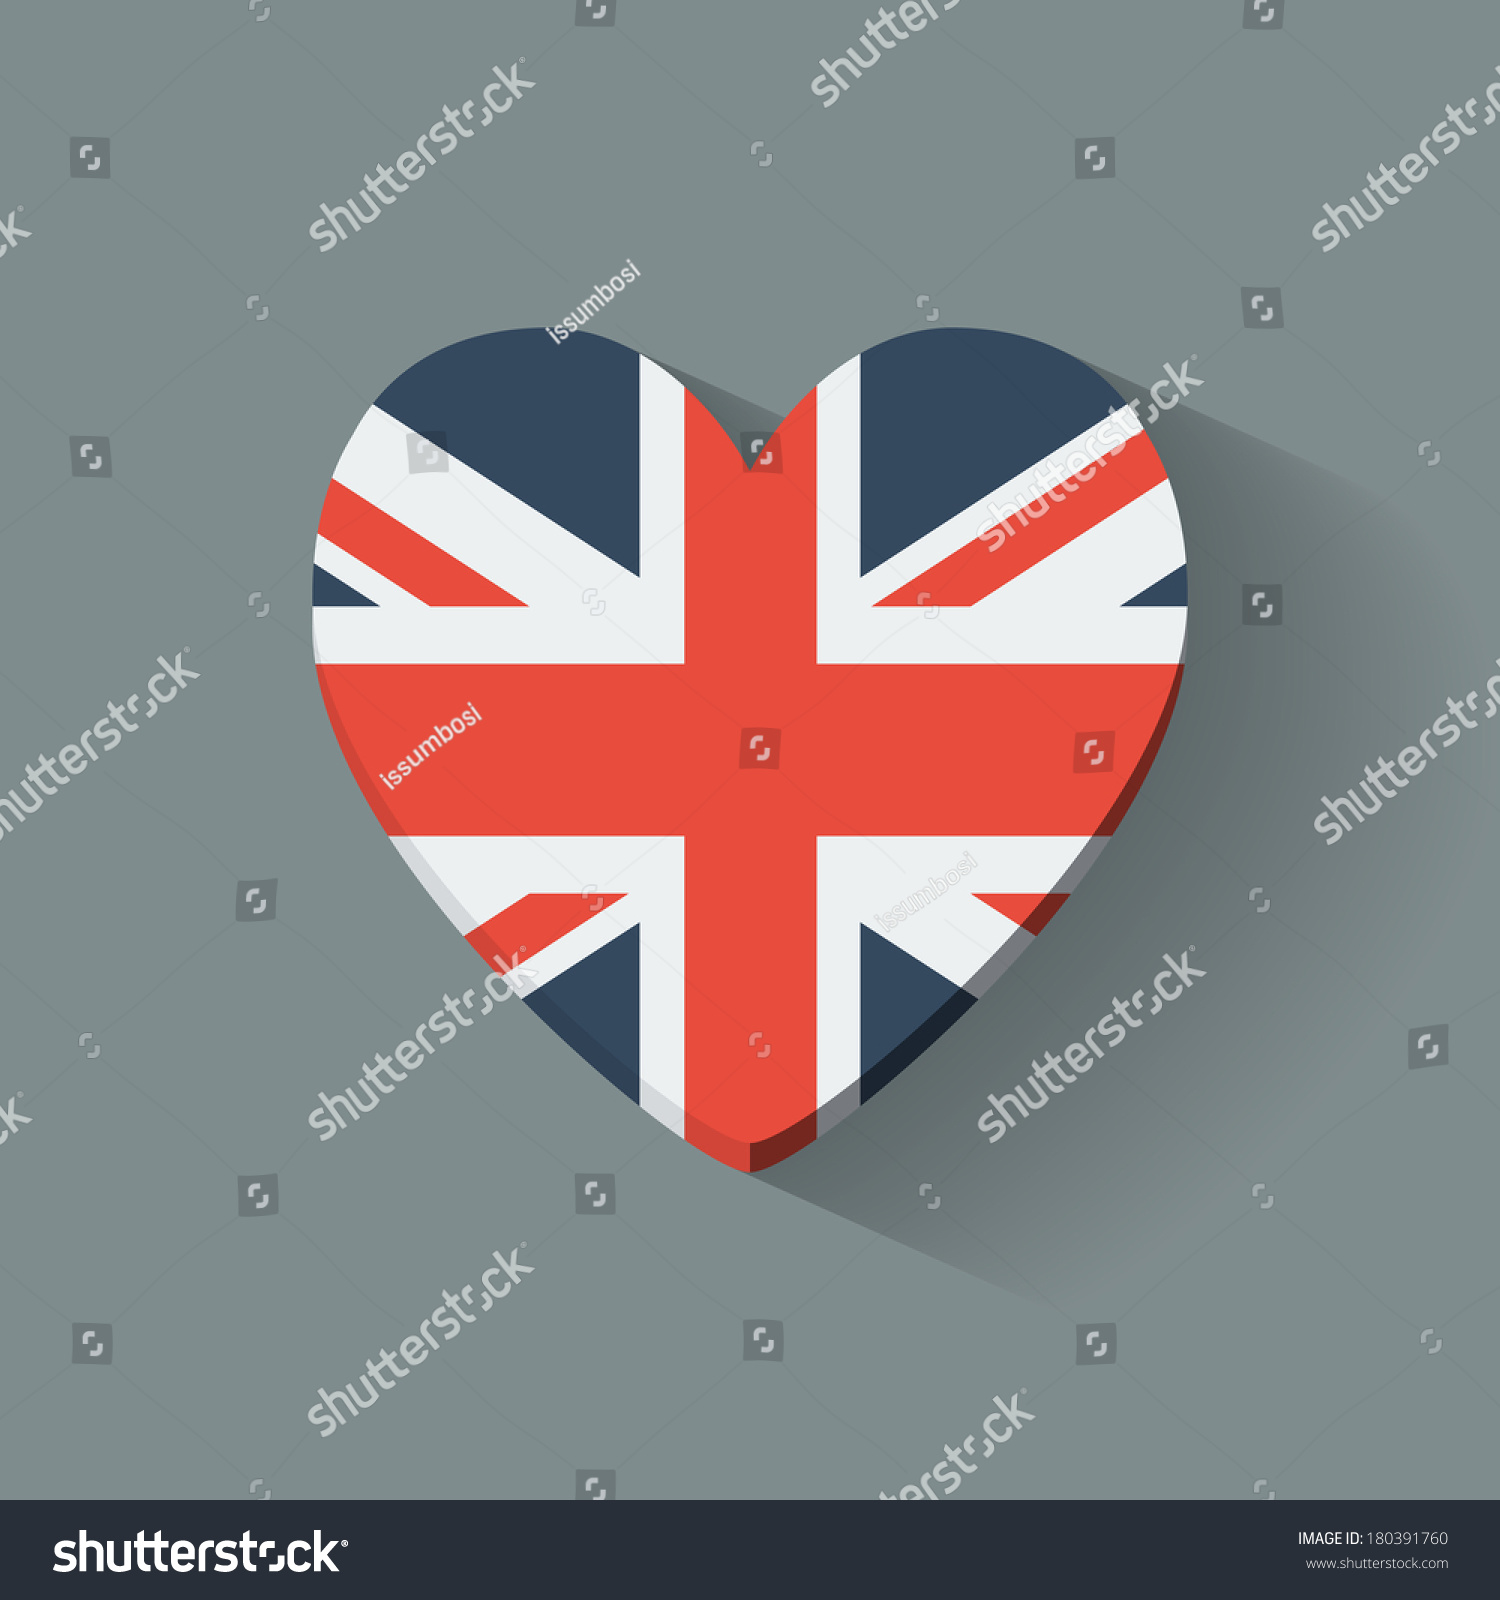 SVG of Heart-shaped icon with national flag of the United Kingdom. Flat design. svg